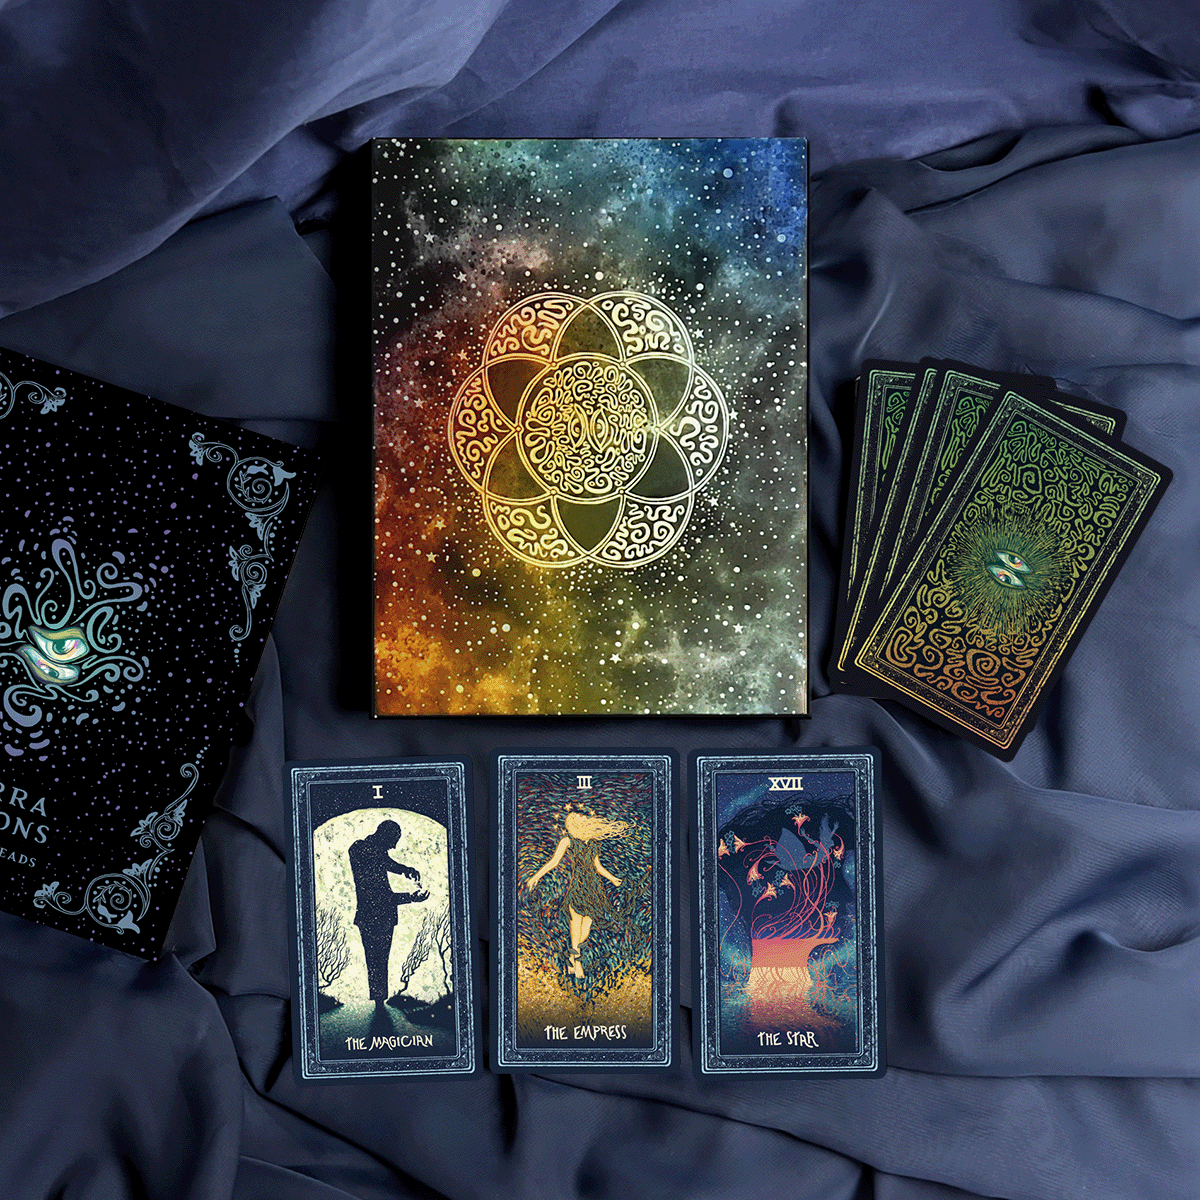 James R. Eads' Mirra Visions merges two decks into a special tarot deck with moving images. It's about connecting and understanding deeper meanings.